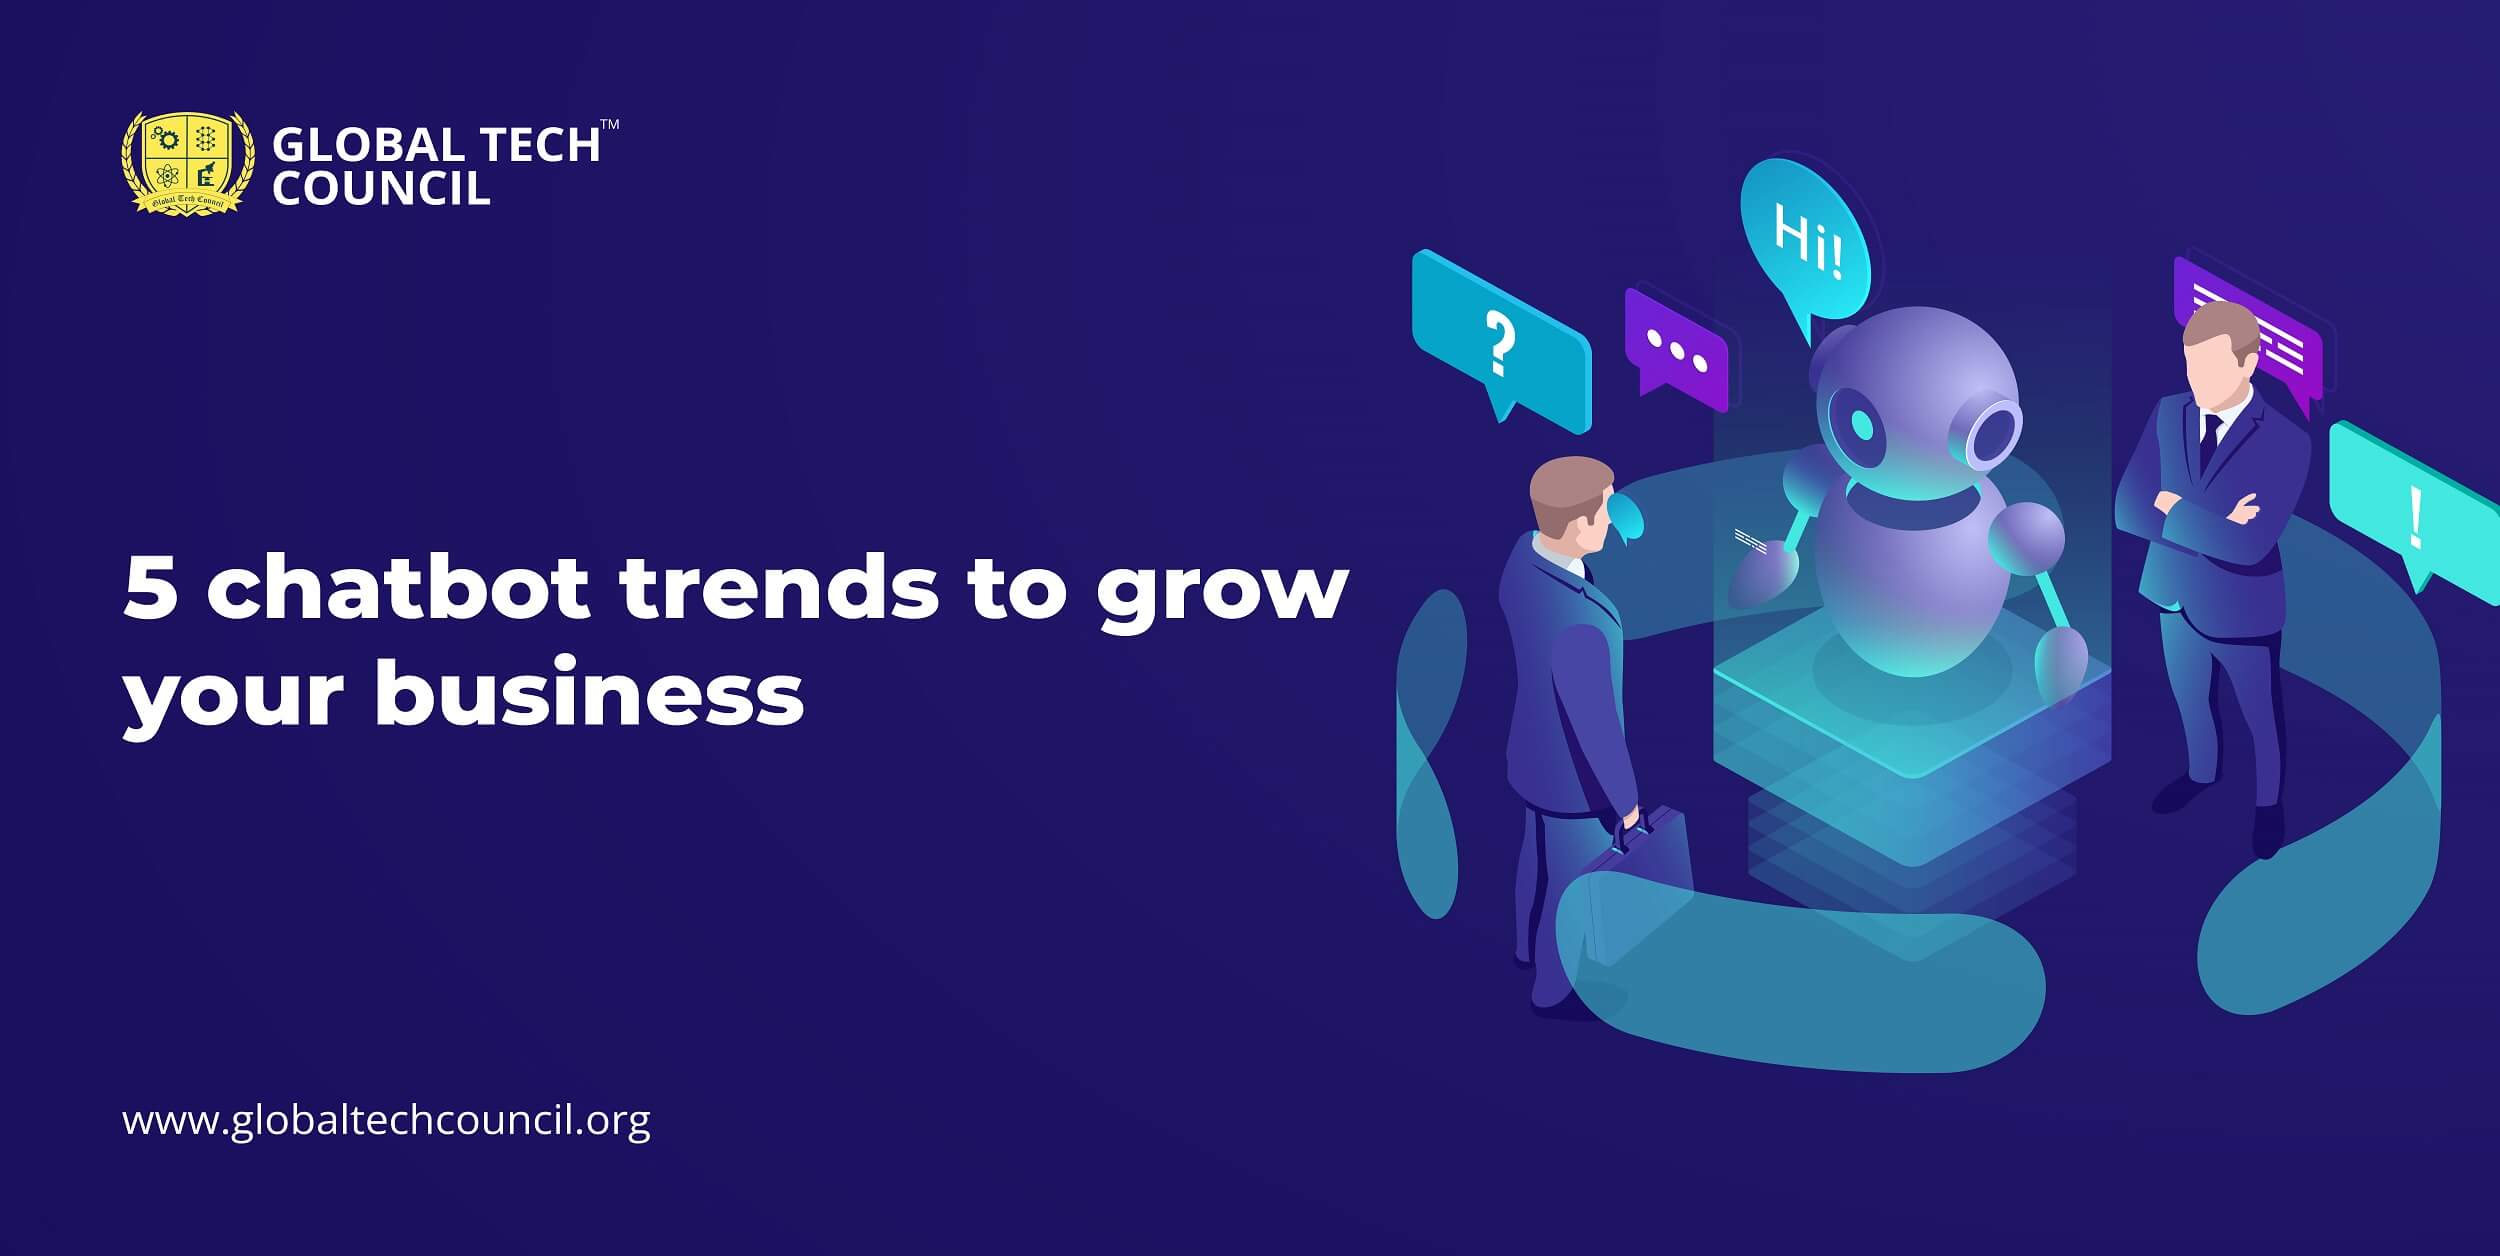 5 chatbot trends to grow your business